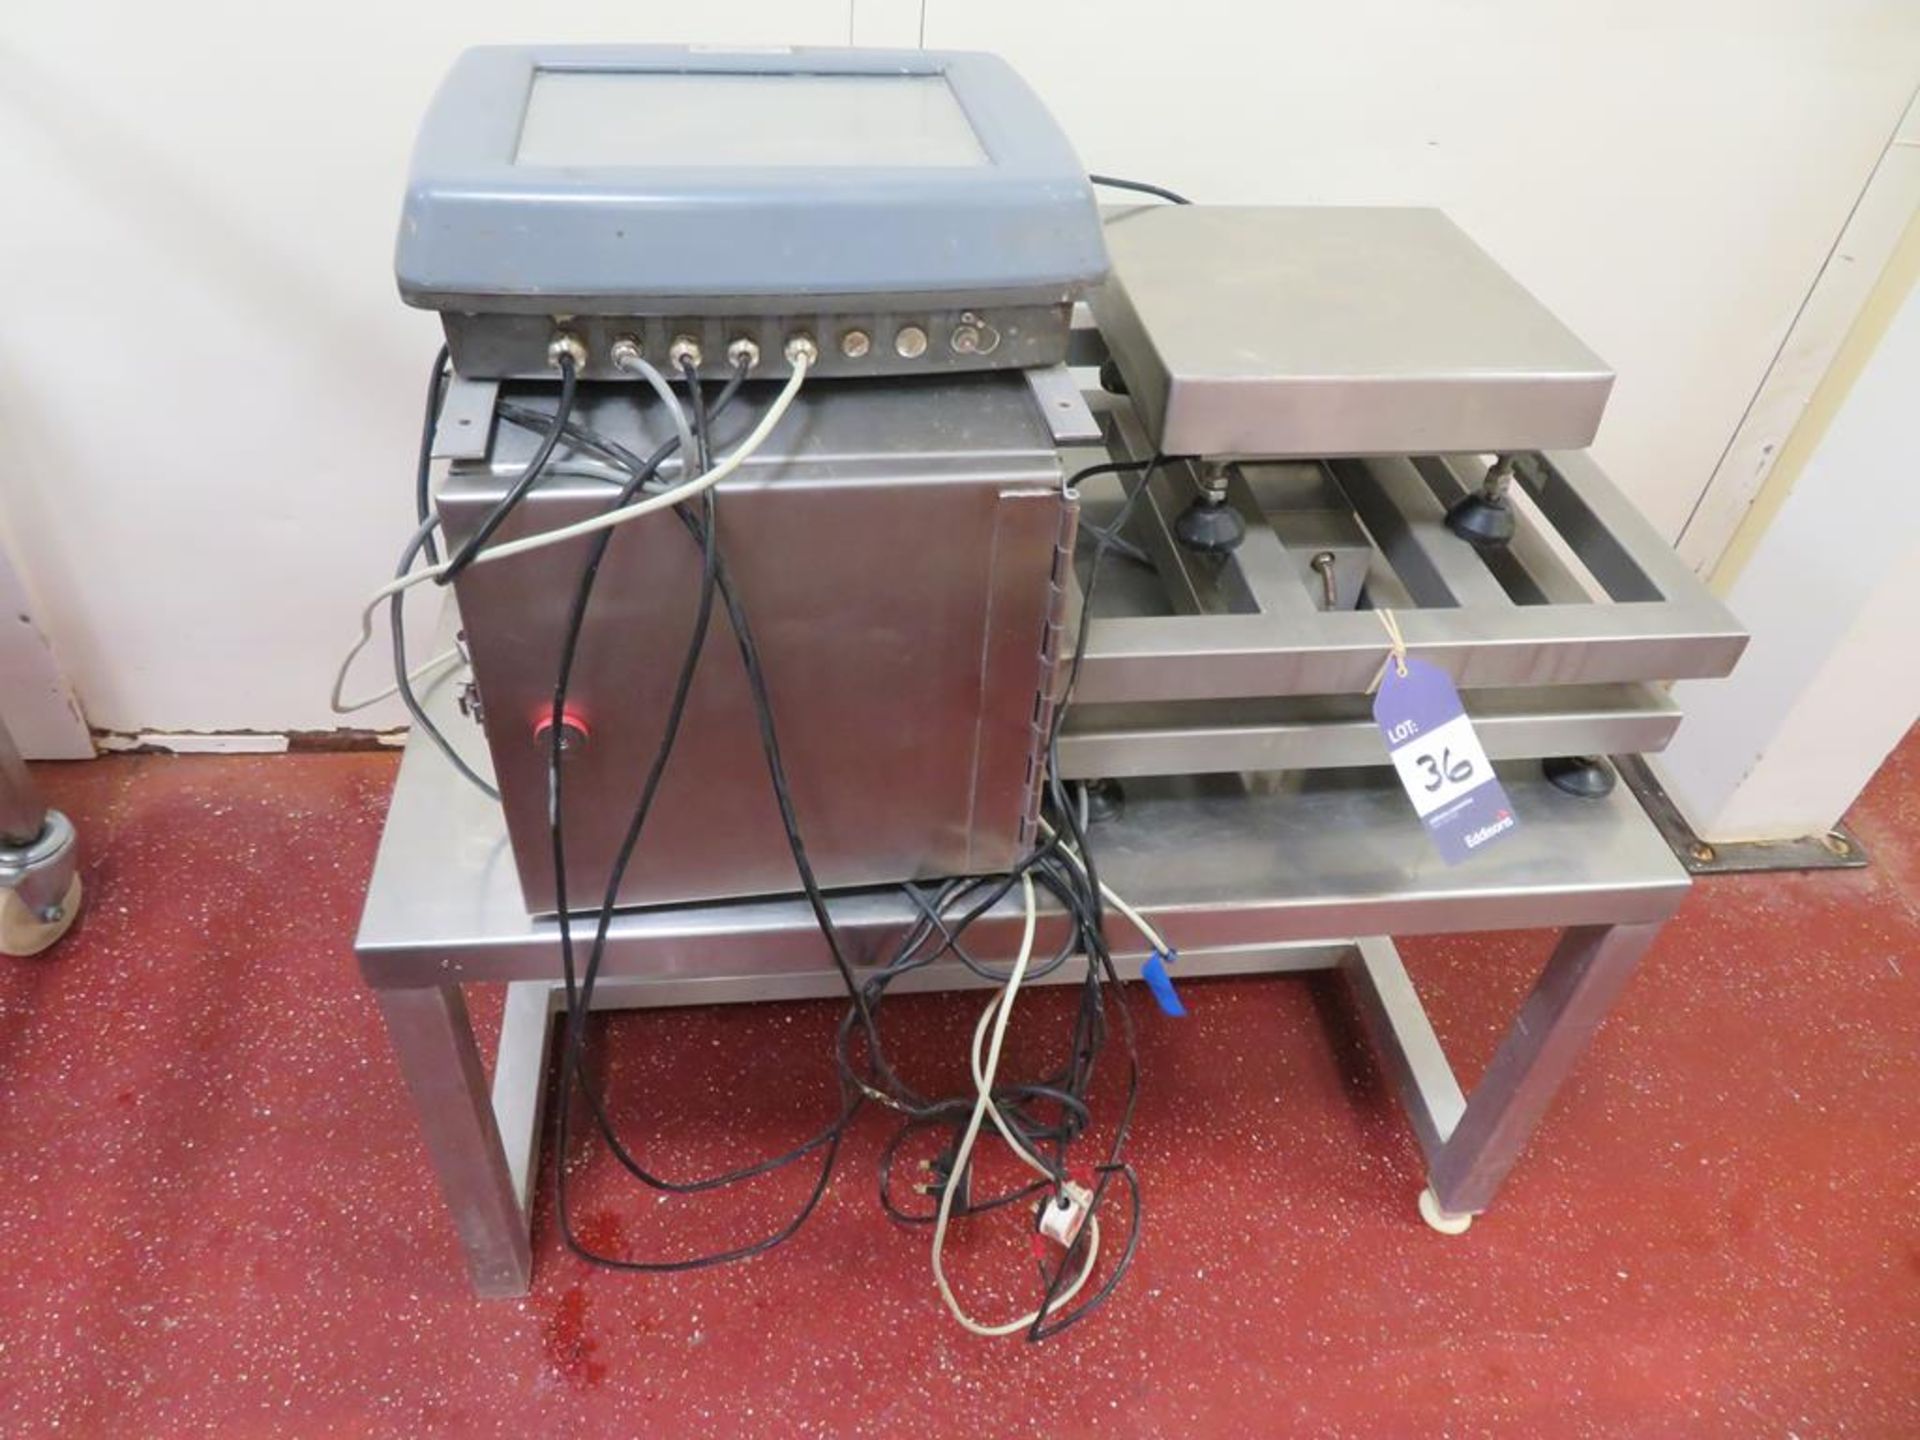 2 x Weighing Platforms, Digital Read Out, Stainless Steel Cabinet & Bench - Image 6 of 6